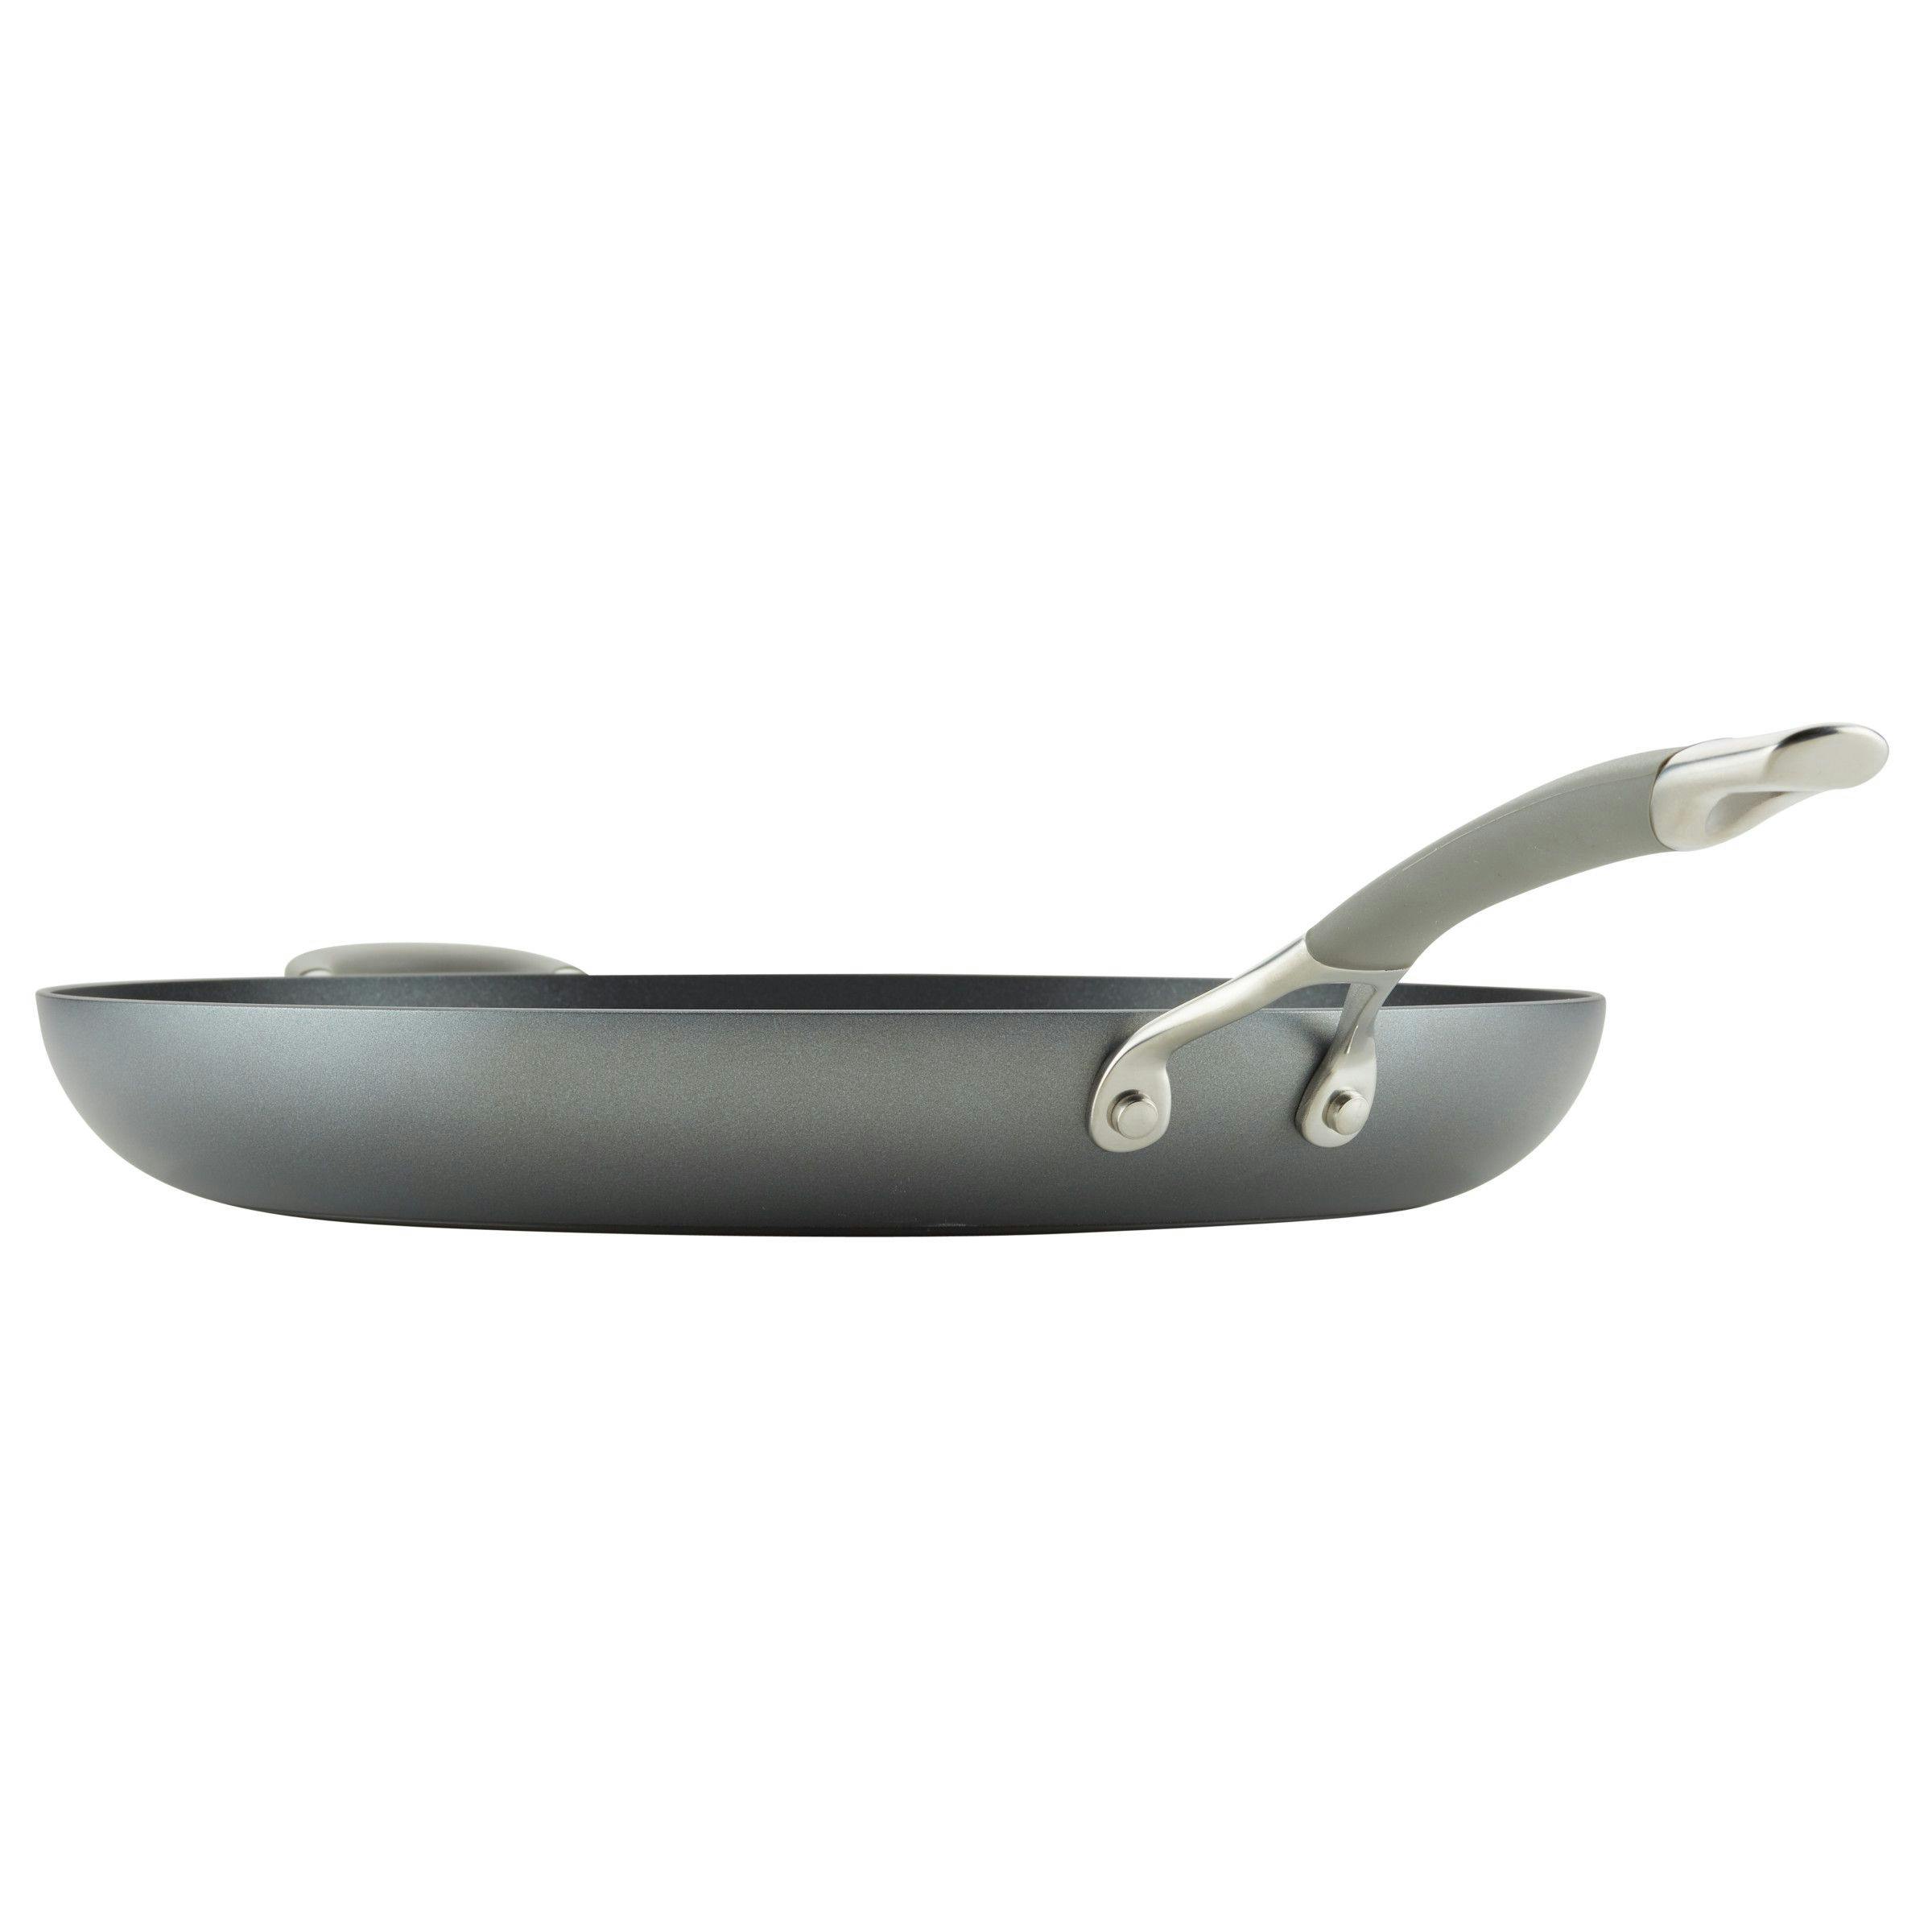 Circulon Elementum Hard-Anodized Nonstick Frying Pan with Helper Handle, 14-Inch, Oyster Gray